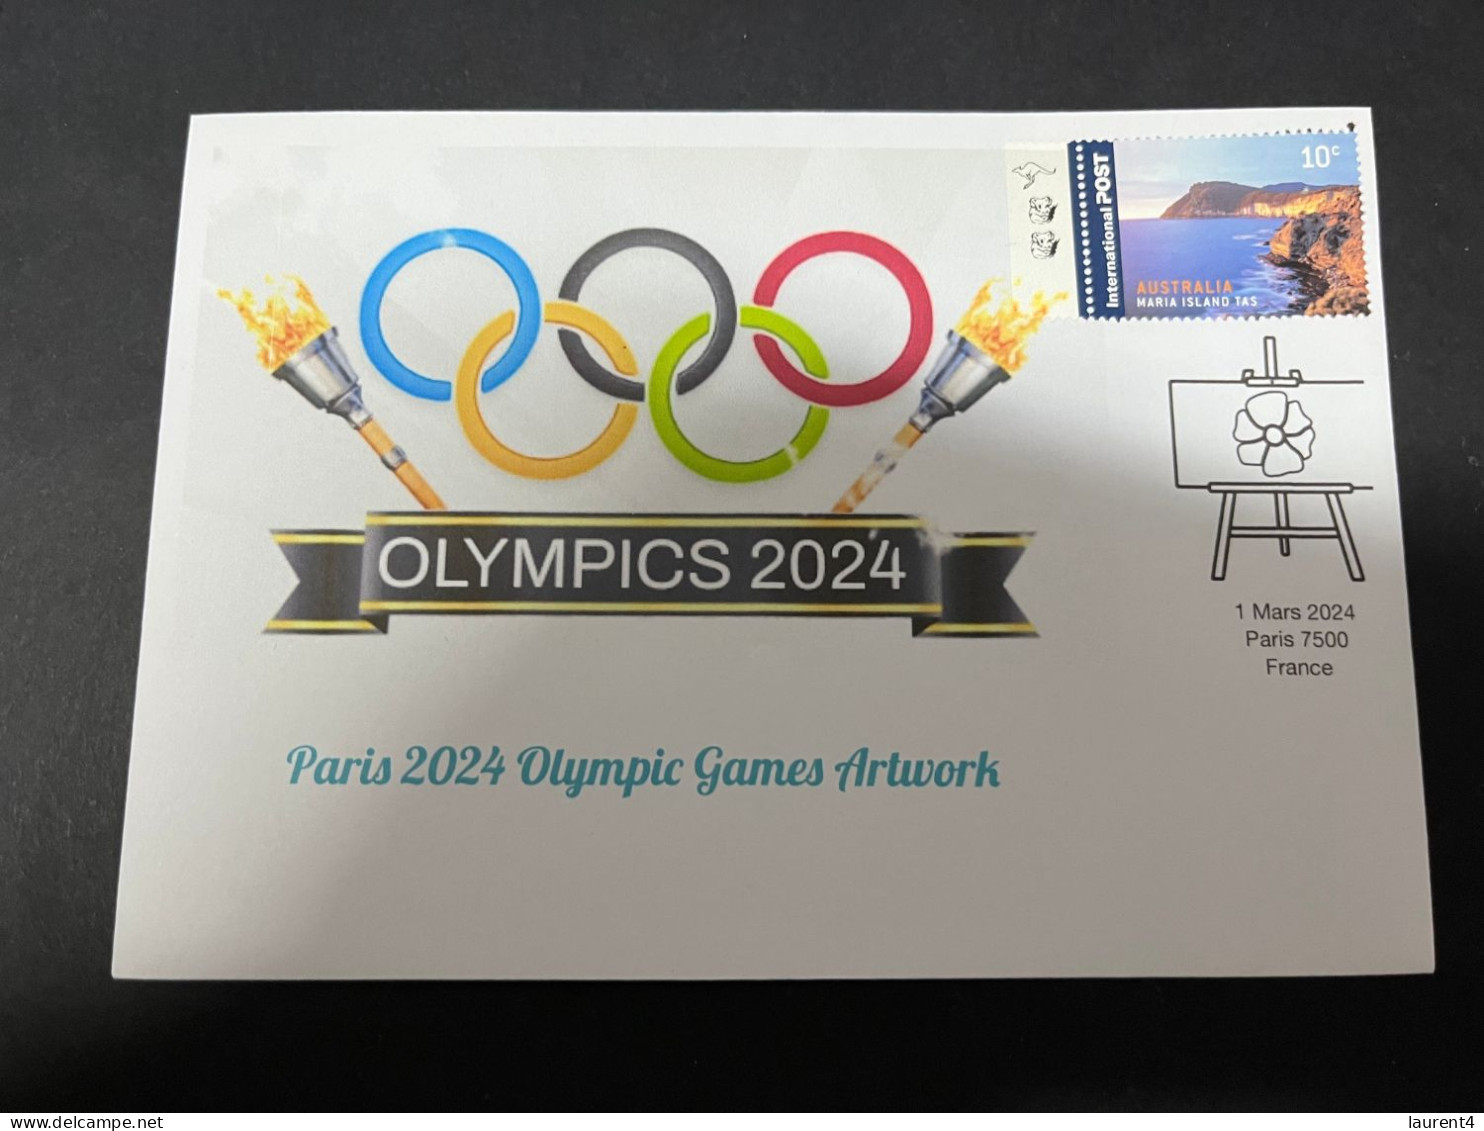 11-3-2024 (2 Y 43) Paris Olympic Games 2024 - 8 (of 12 Covers Series) For The Paris 2024 Olympic Games Artwork - Estate 2024 : Parigi